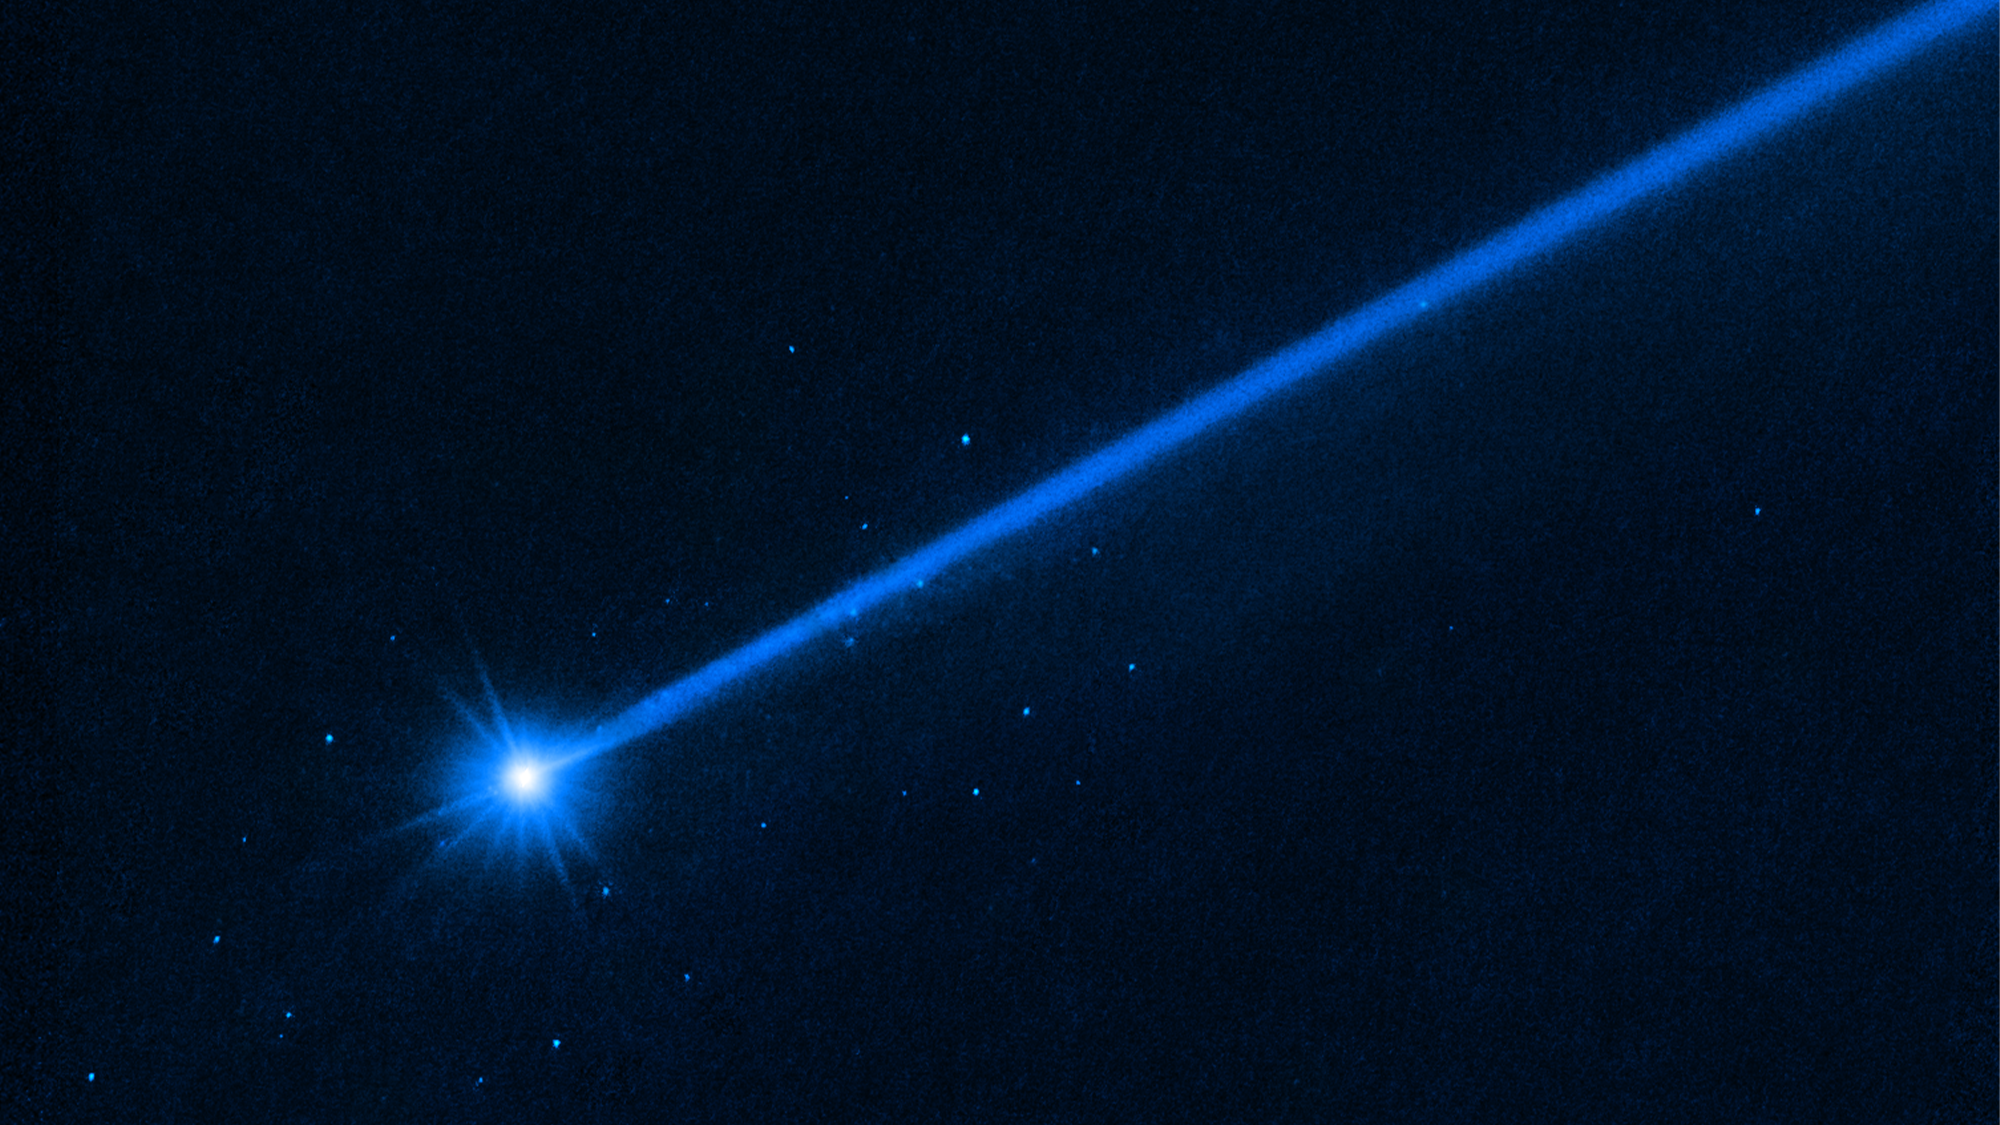 This Hubble Space Telescope image of the asteroid Dimorphos was taken on December 19, 2022, about four months after the asteroid was impacted by NASA's DART mission (Double Asteroid Redirection Test). Hubble’s sensitivity reveals a few dozen boulders knocked off the asteroid by the force of the collision. These are among the faintest objects Hubble has ever photographed inside the solar system.